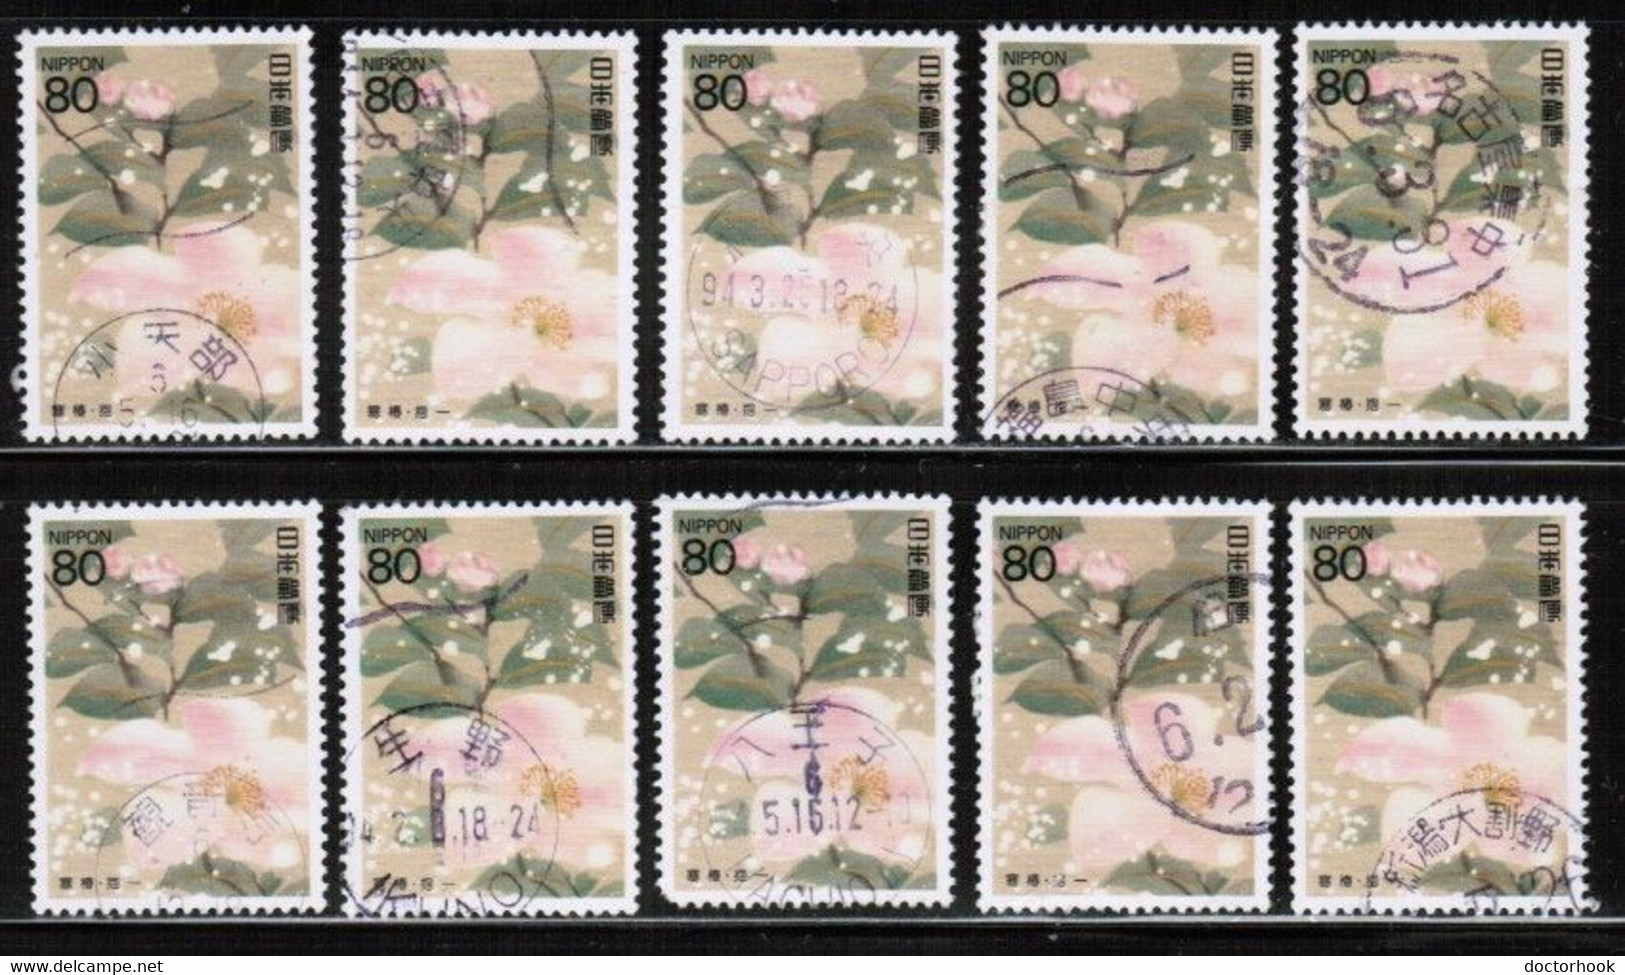 JAPAN   Scott # 2183 USED WHOLESALE LOT OF 10 (CONDITION AS PER SCAN) (WH-604) - Lots & Serien